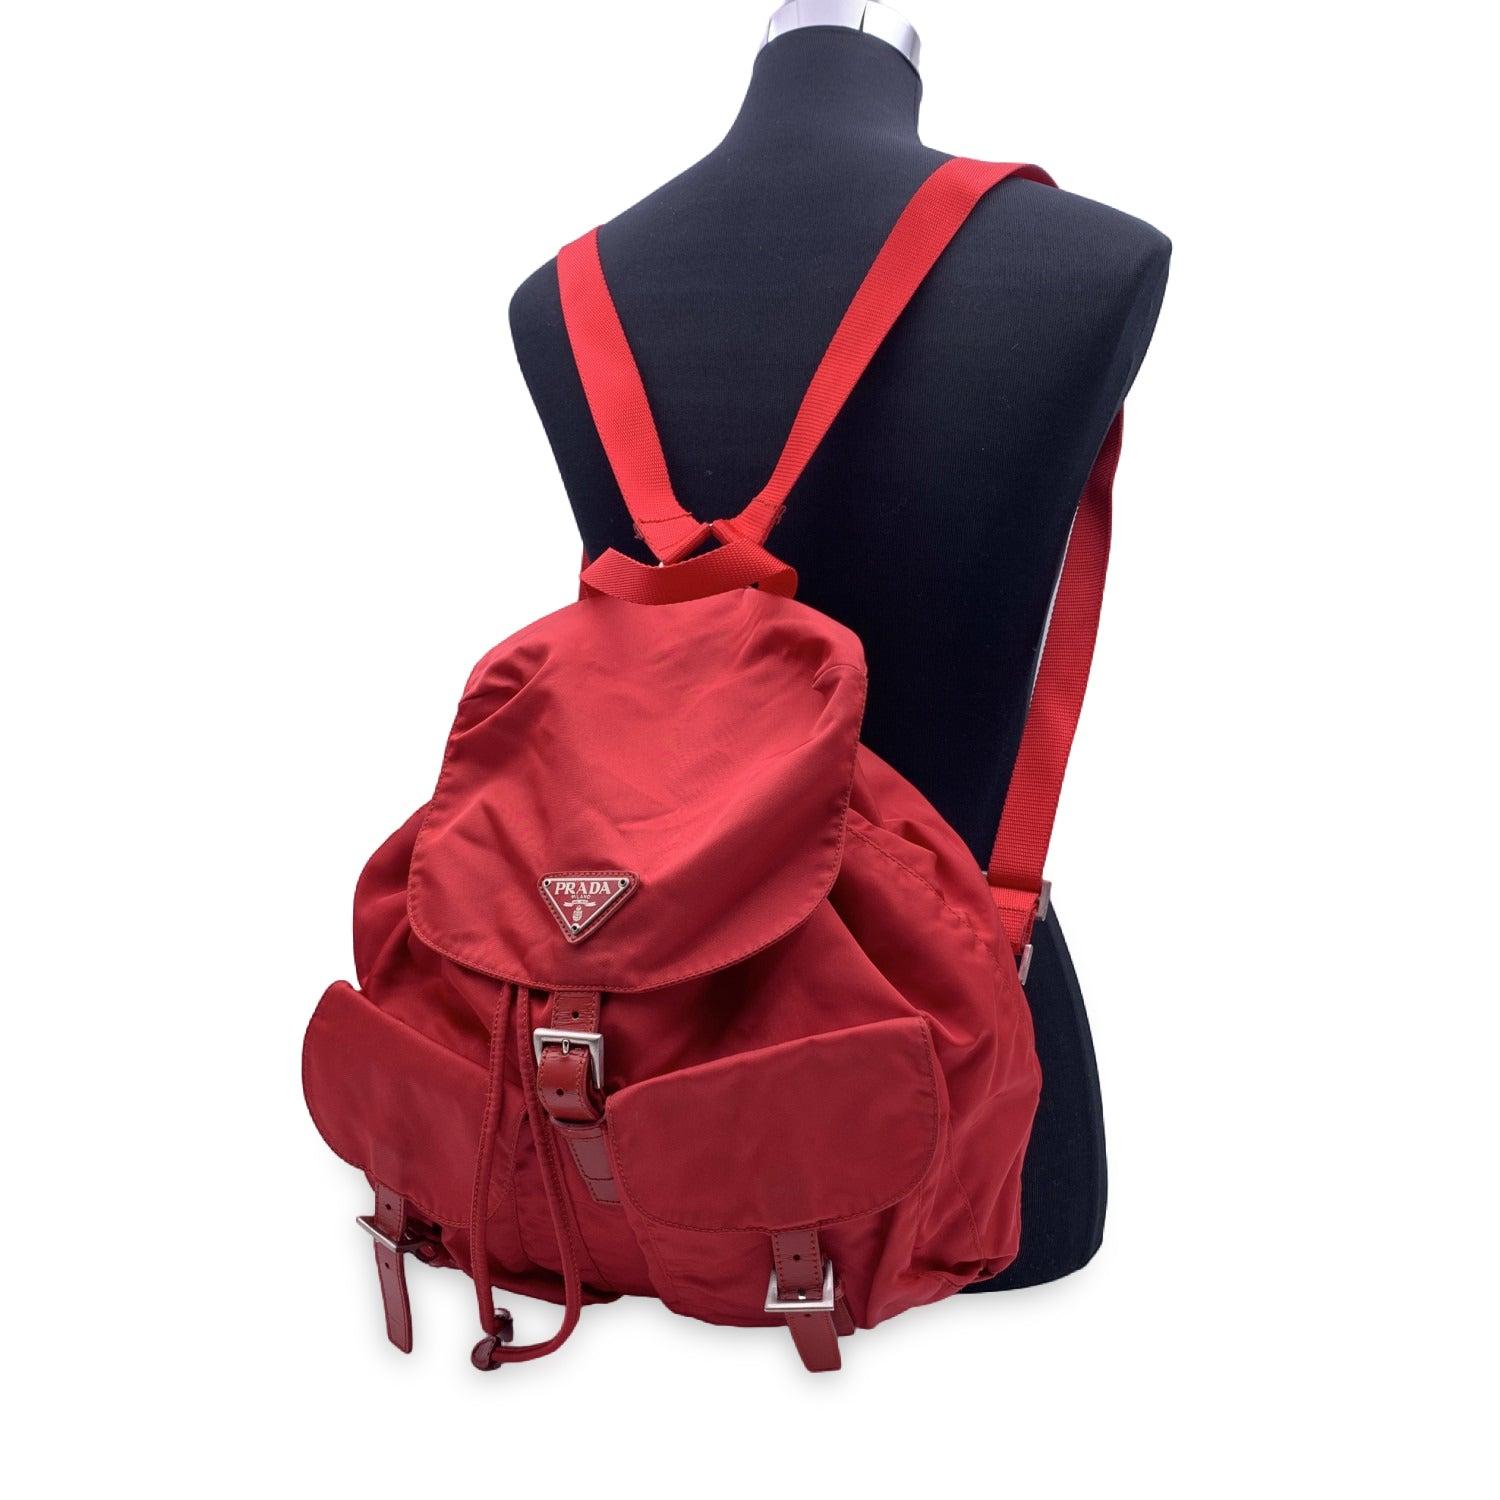 Prada Vintage Red Nylon Canvas Backpack. Nylon with silver hardware. Adjustable straps. Drawstring top closure. Flap top with magnetic button closure with PRADA triangle logo plaque on the flap. Double exterior pockets. PRADA fabric lining with 1